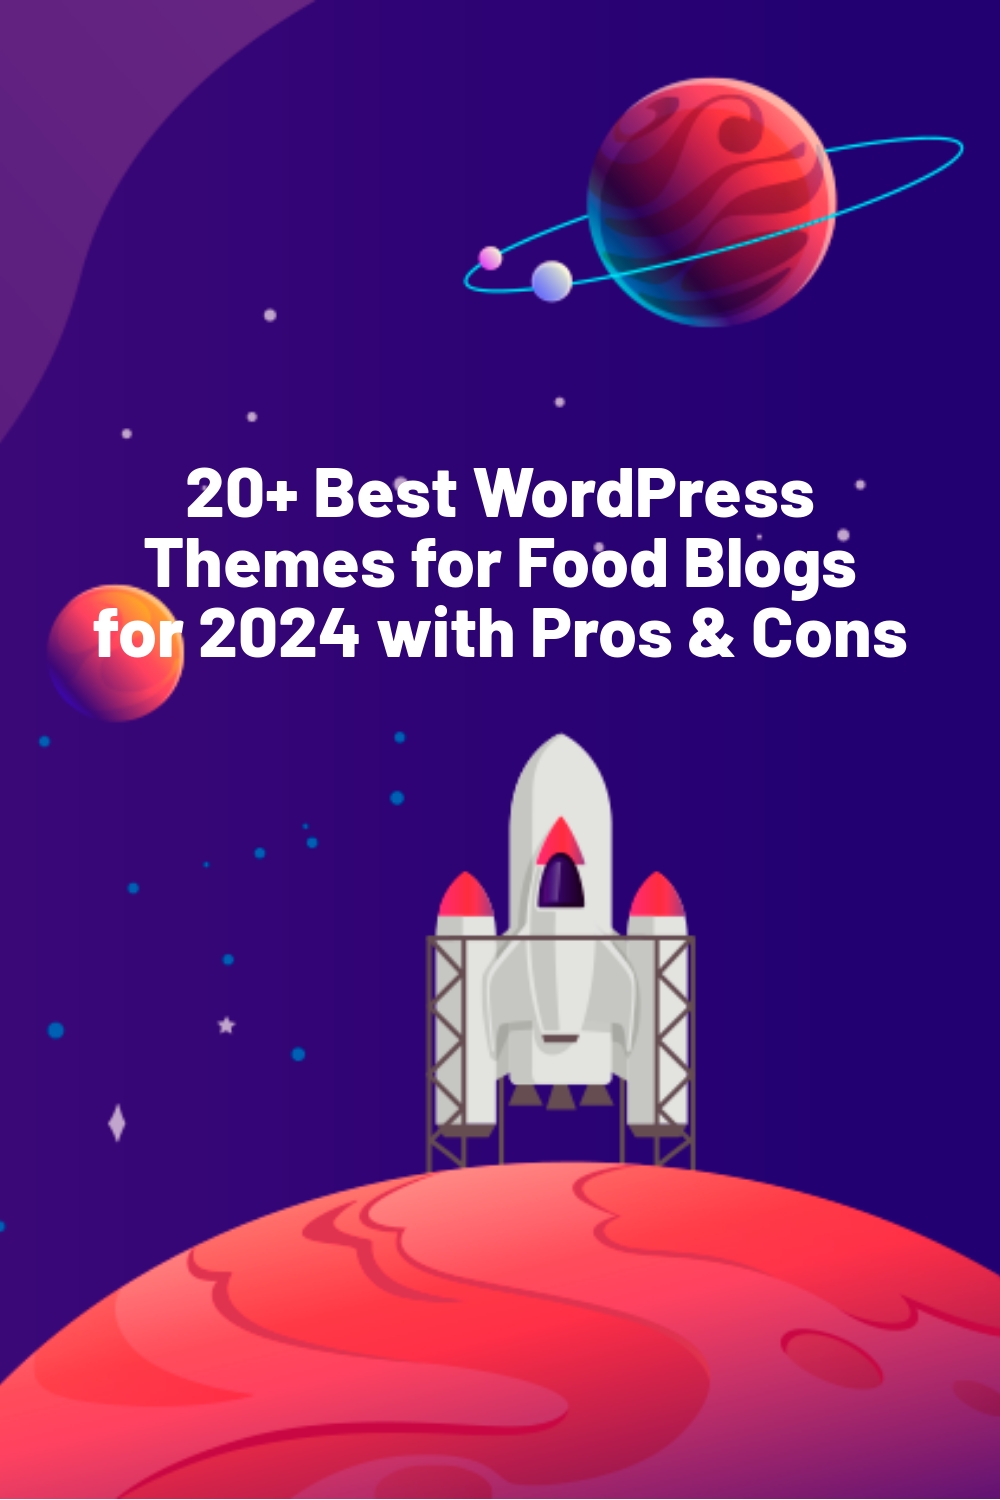 20+ Best WordPress Themes for Food Blogs for 2024 with Pros & Cons